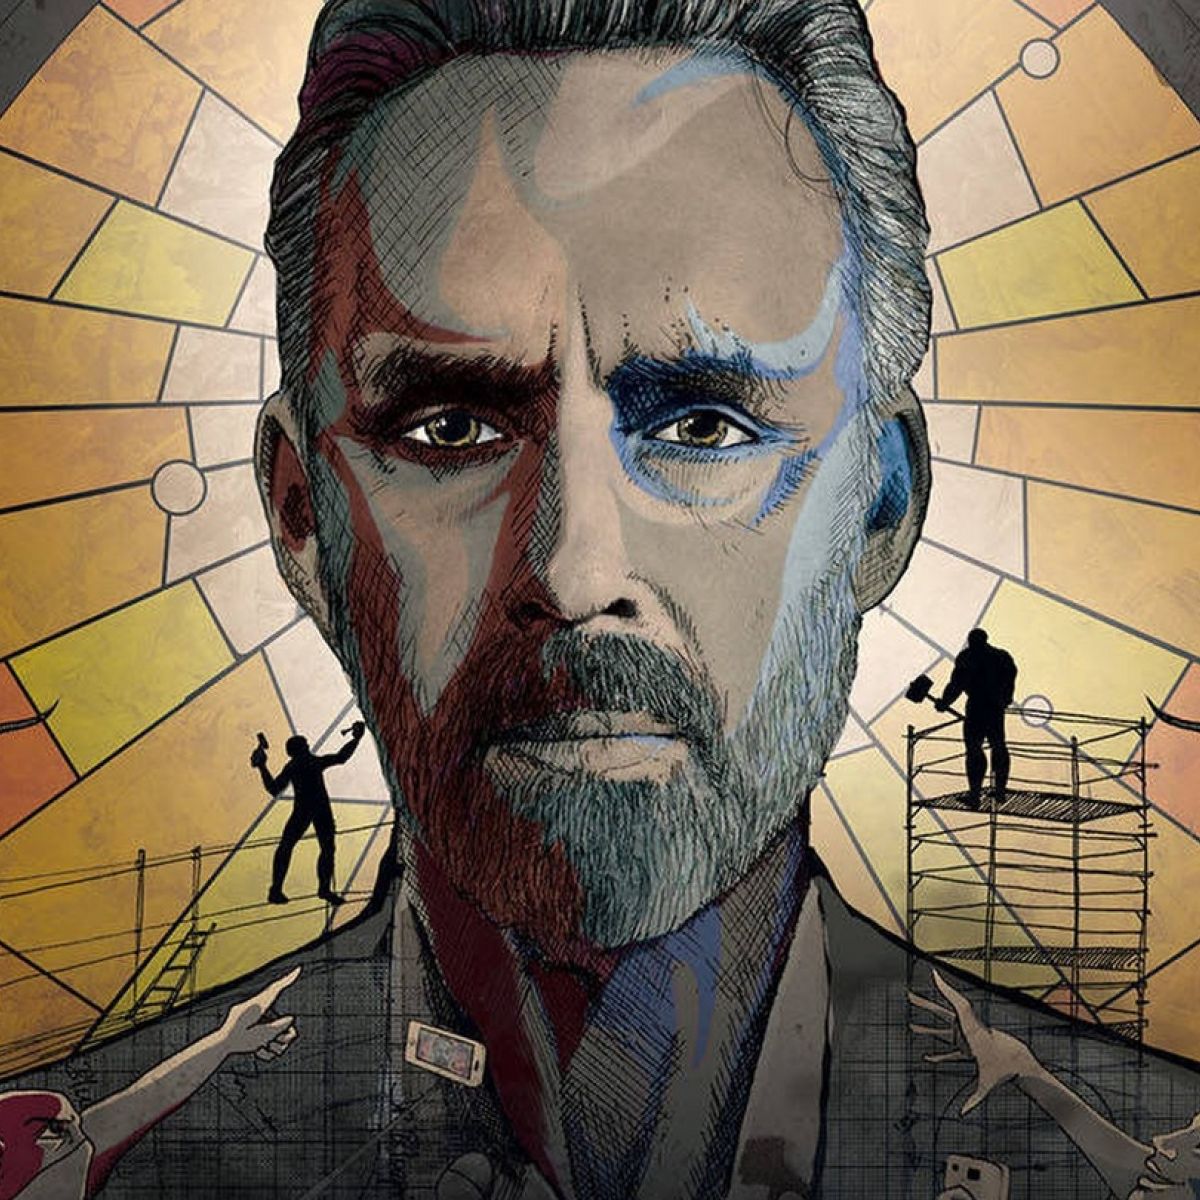 There's a difference between Jordan Peterson and a film about